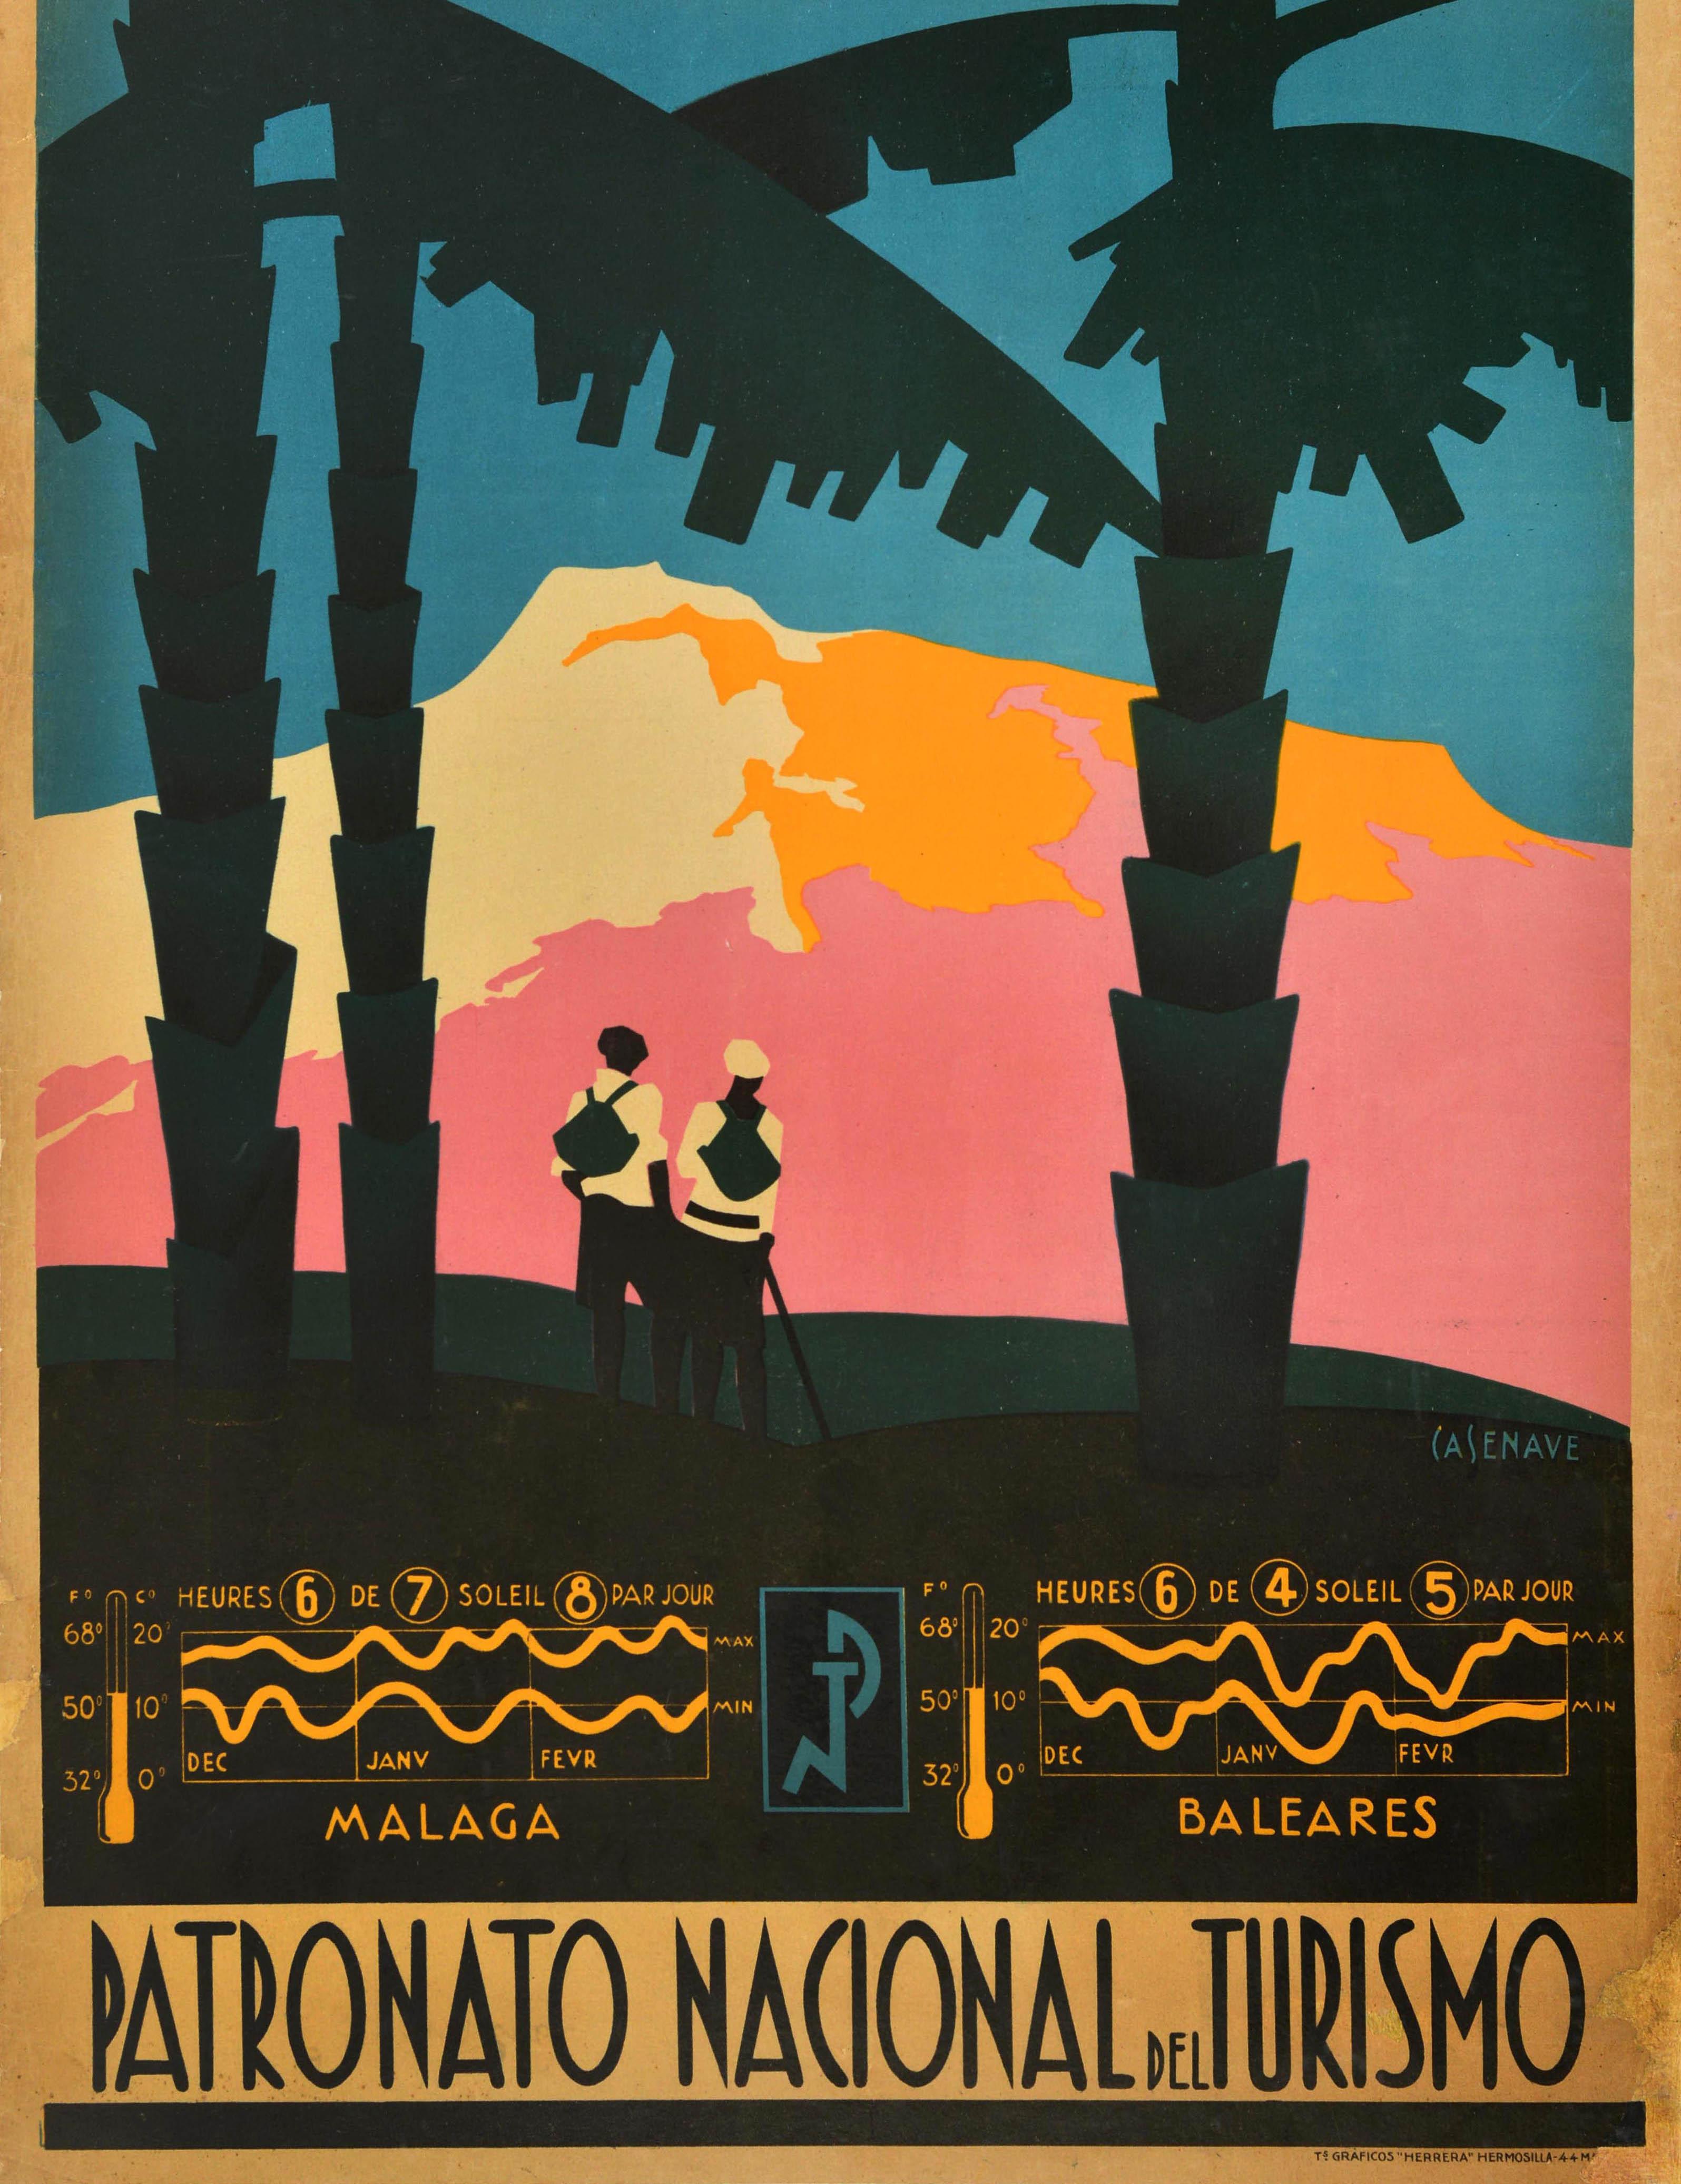 Original antique travel poster - L'hiver en Espagne / Winter in Spain - featuring a stunning Art Deco design depicting two people wearing backpacks, one holding a walking stick, standing on a hill under palm trees and enjoying the scenic view